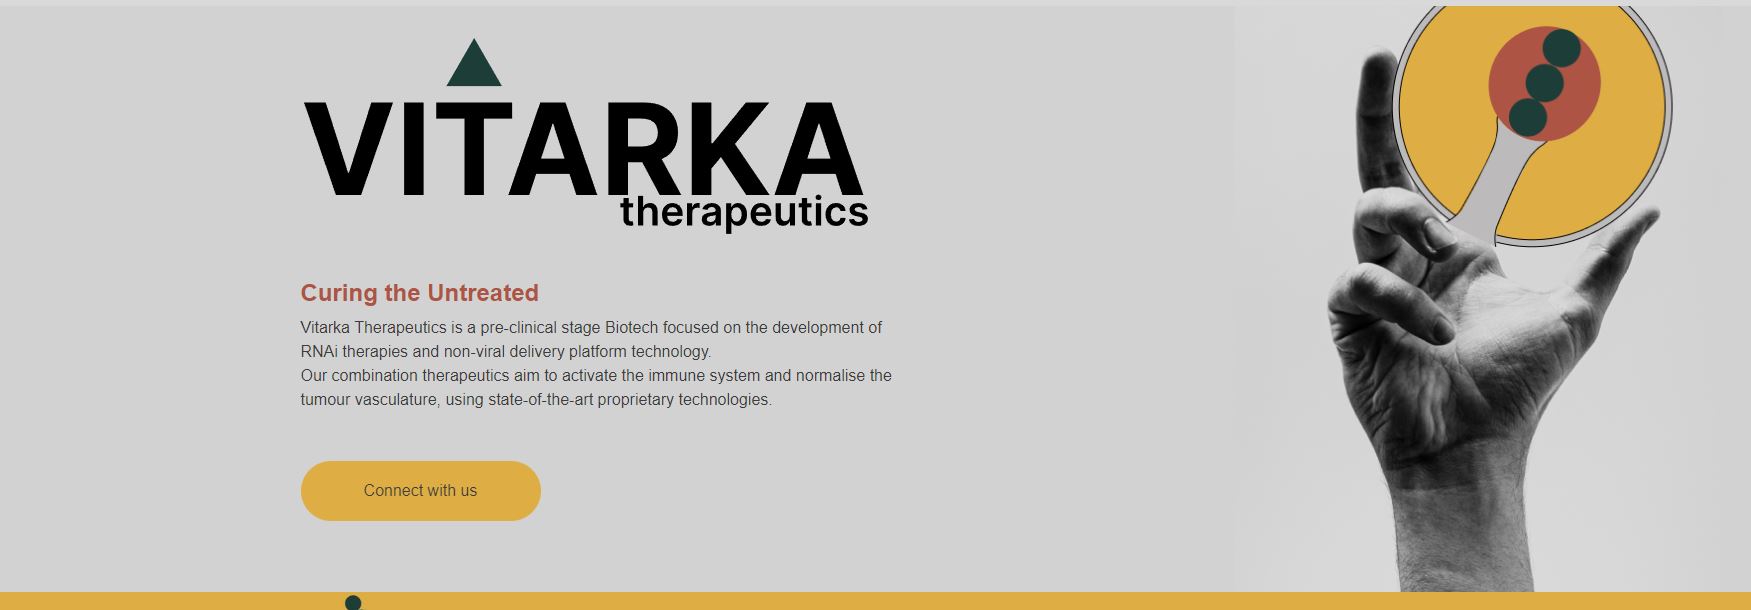 With a recent funding injection of $1.6M from investors, Vitarka Therapeutics is making waves